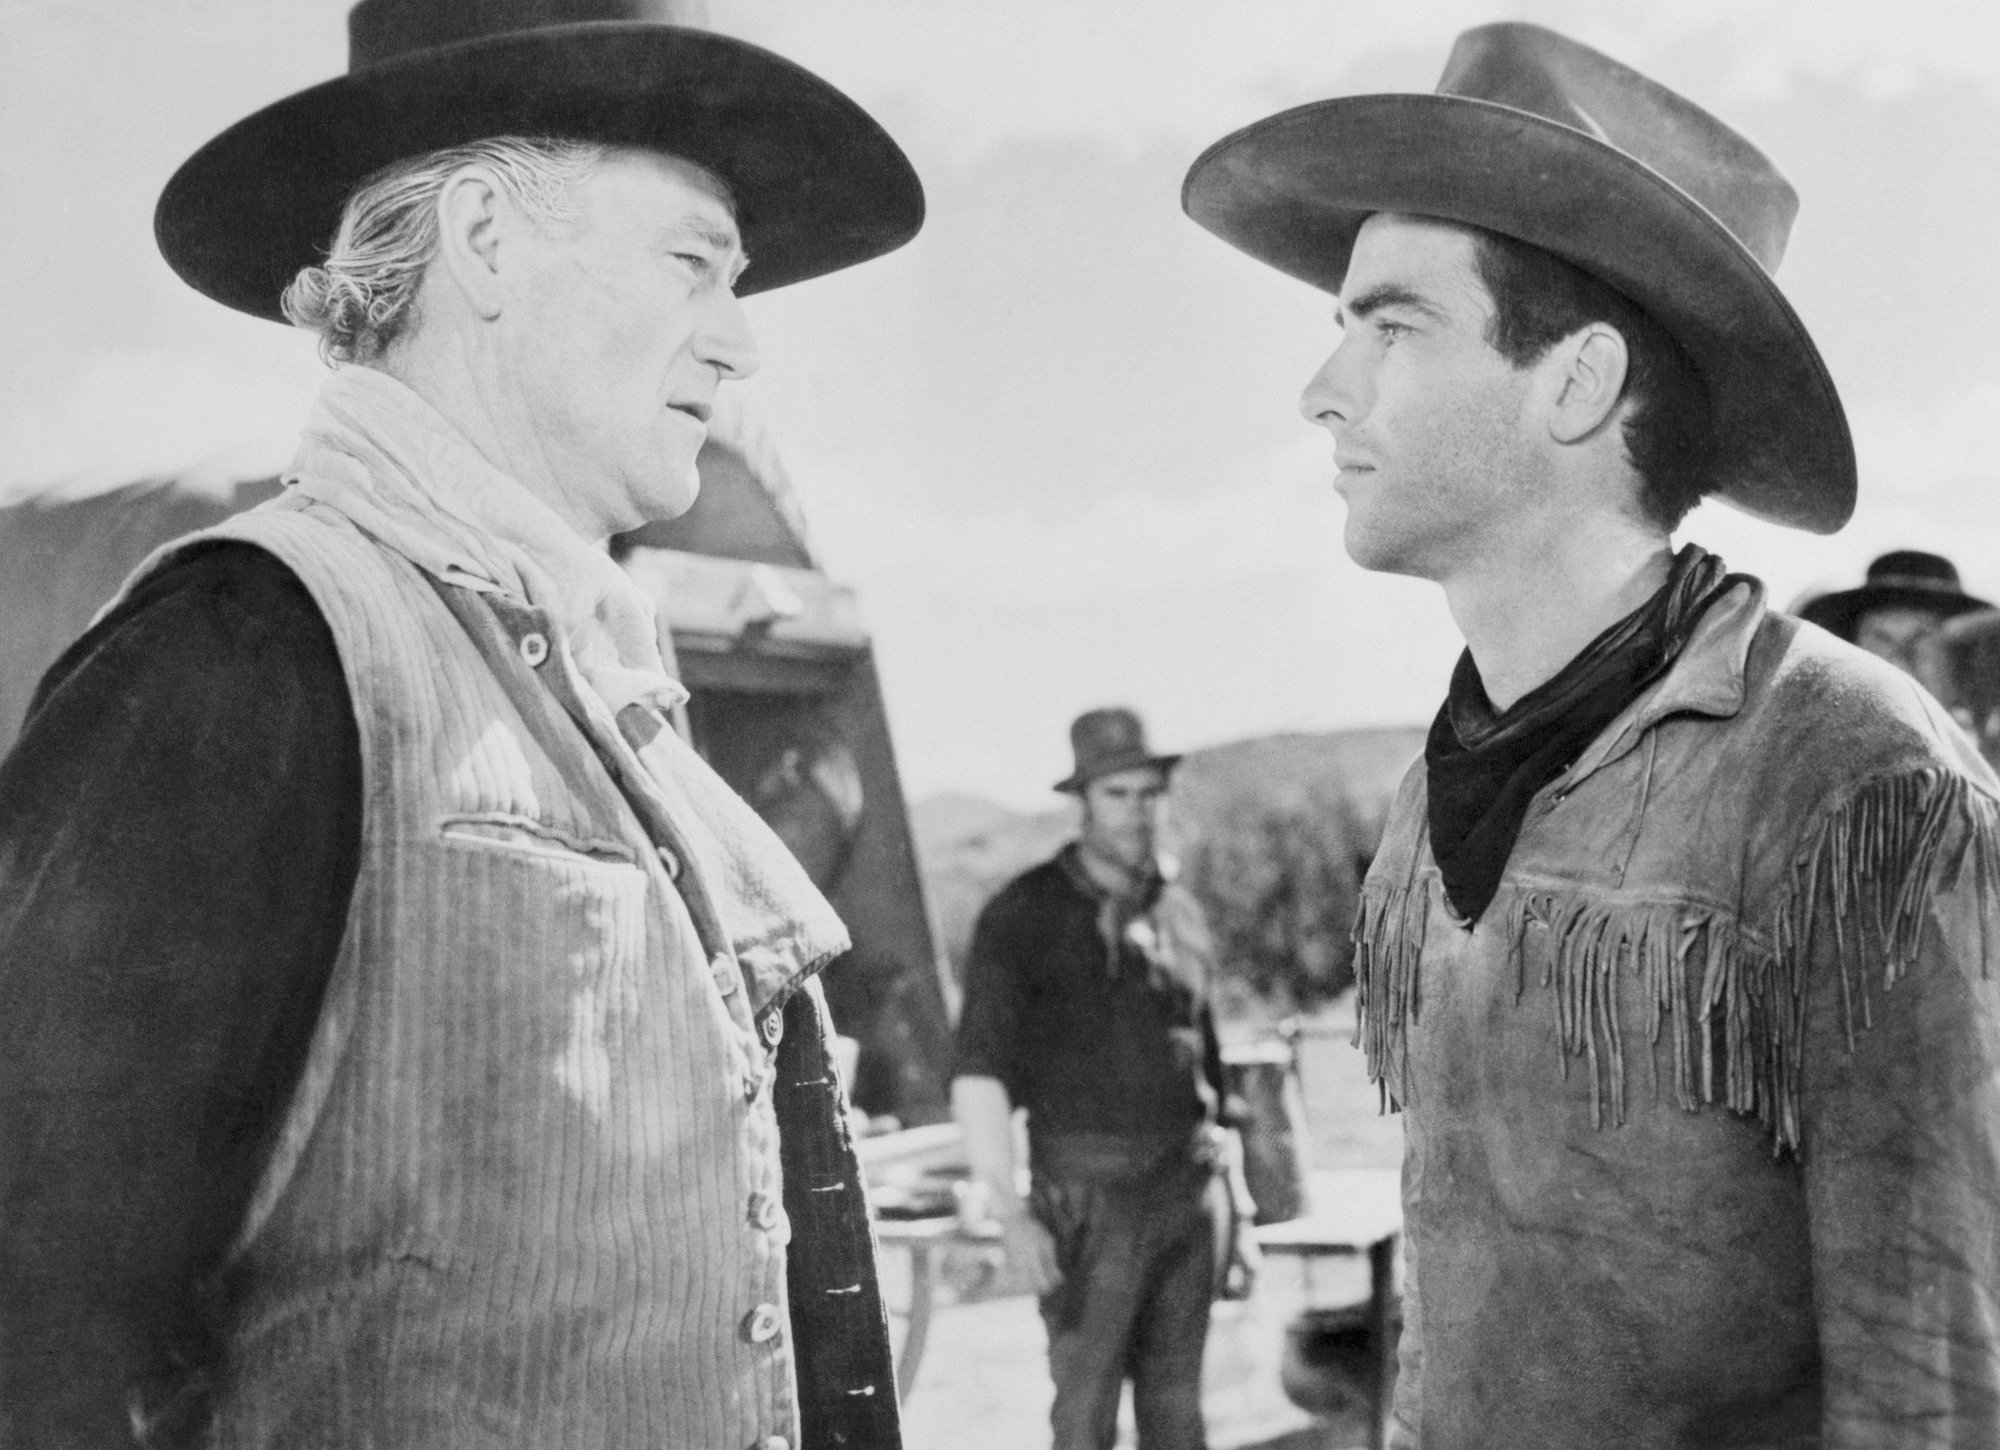 'Red River' John Wayne as Thomas Dunson and Montgomery Clift as Matt Garth facing each other in Western costumes